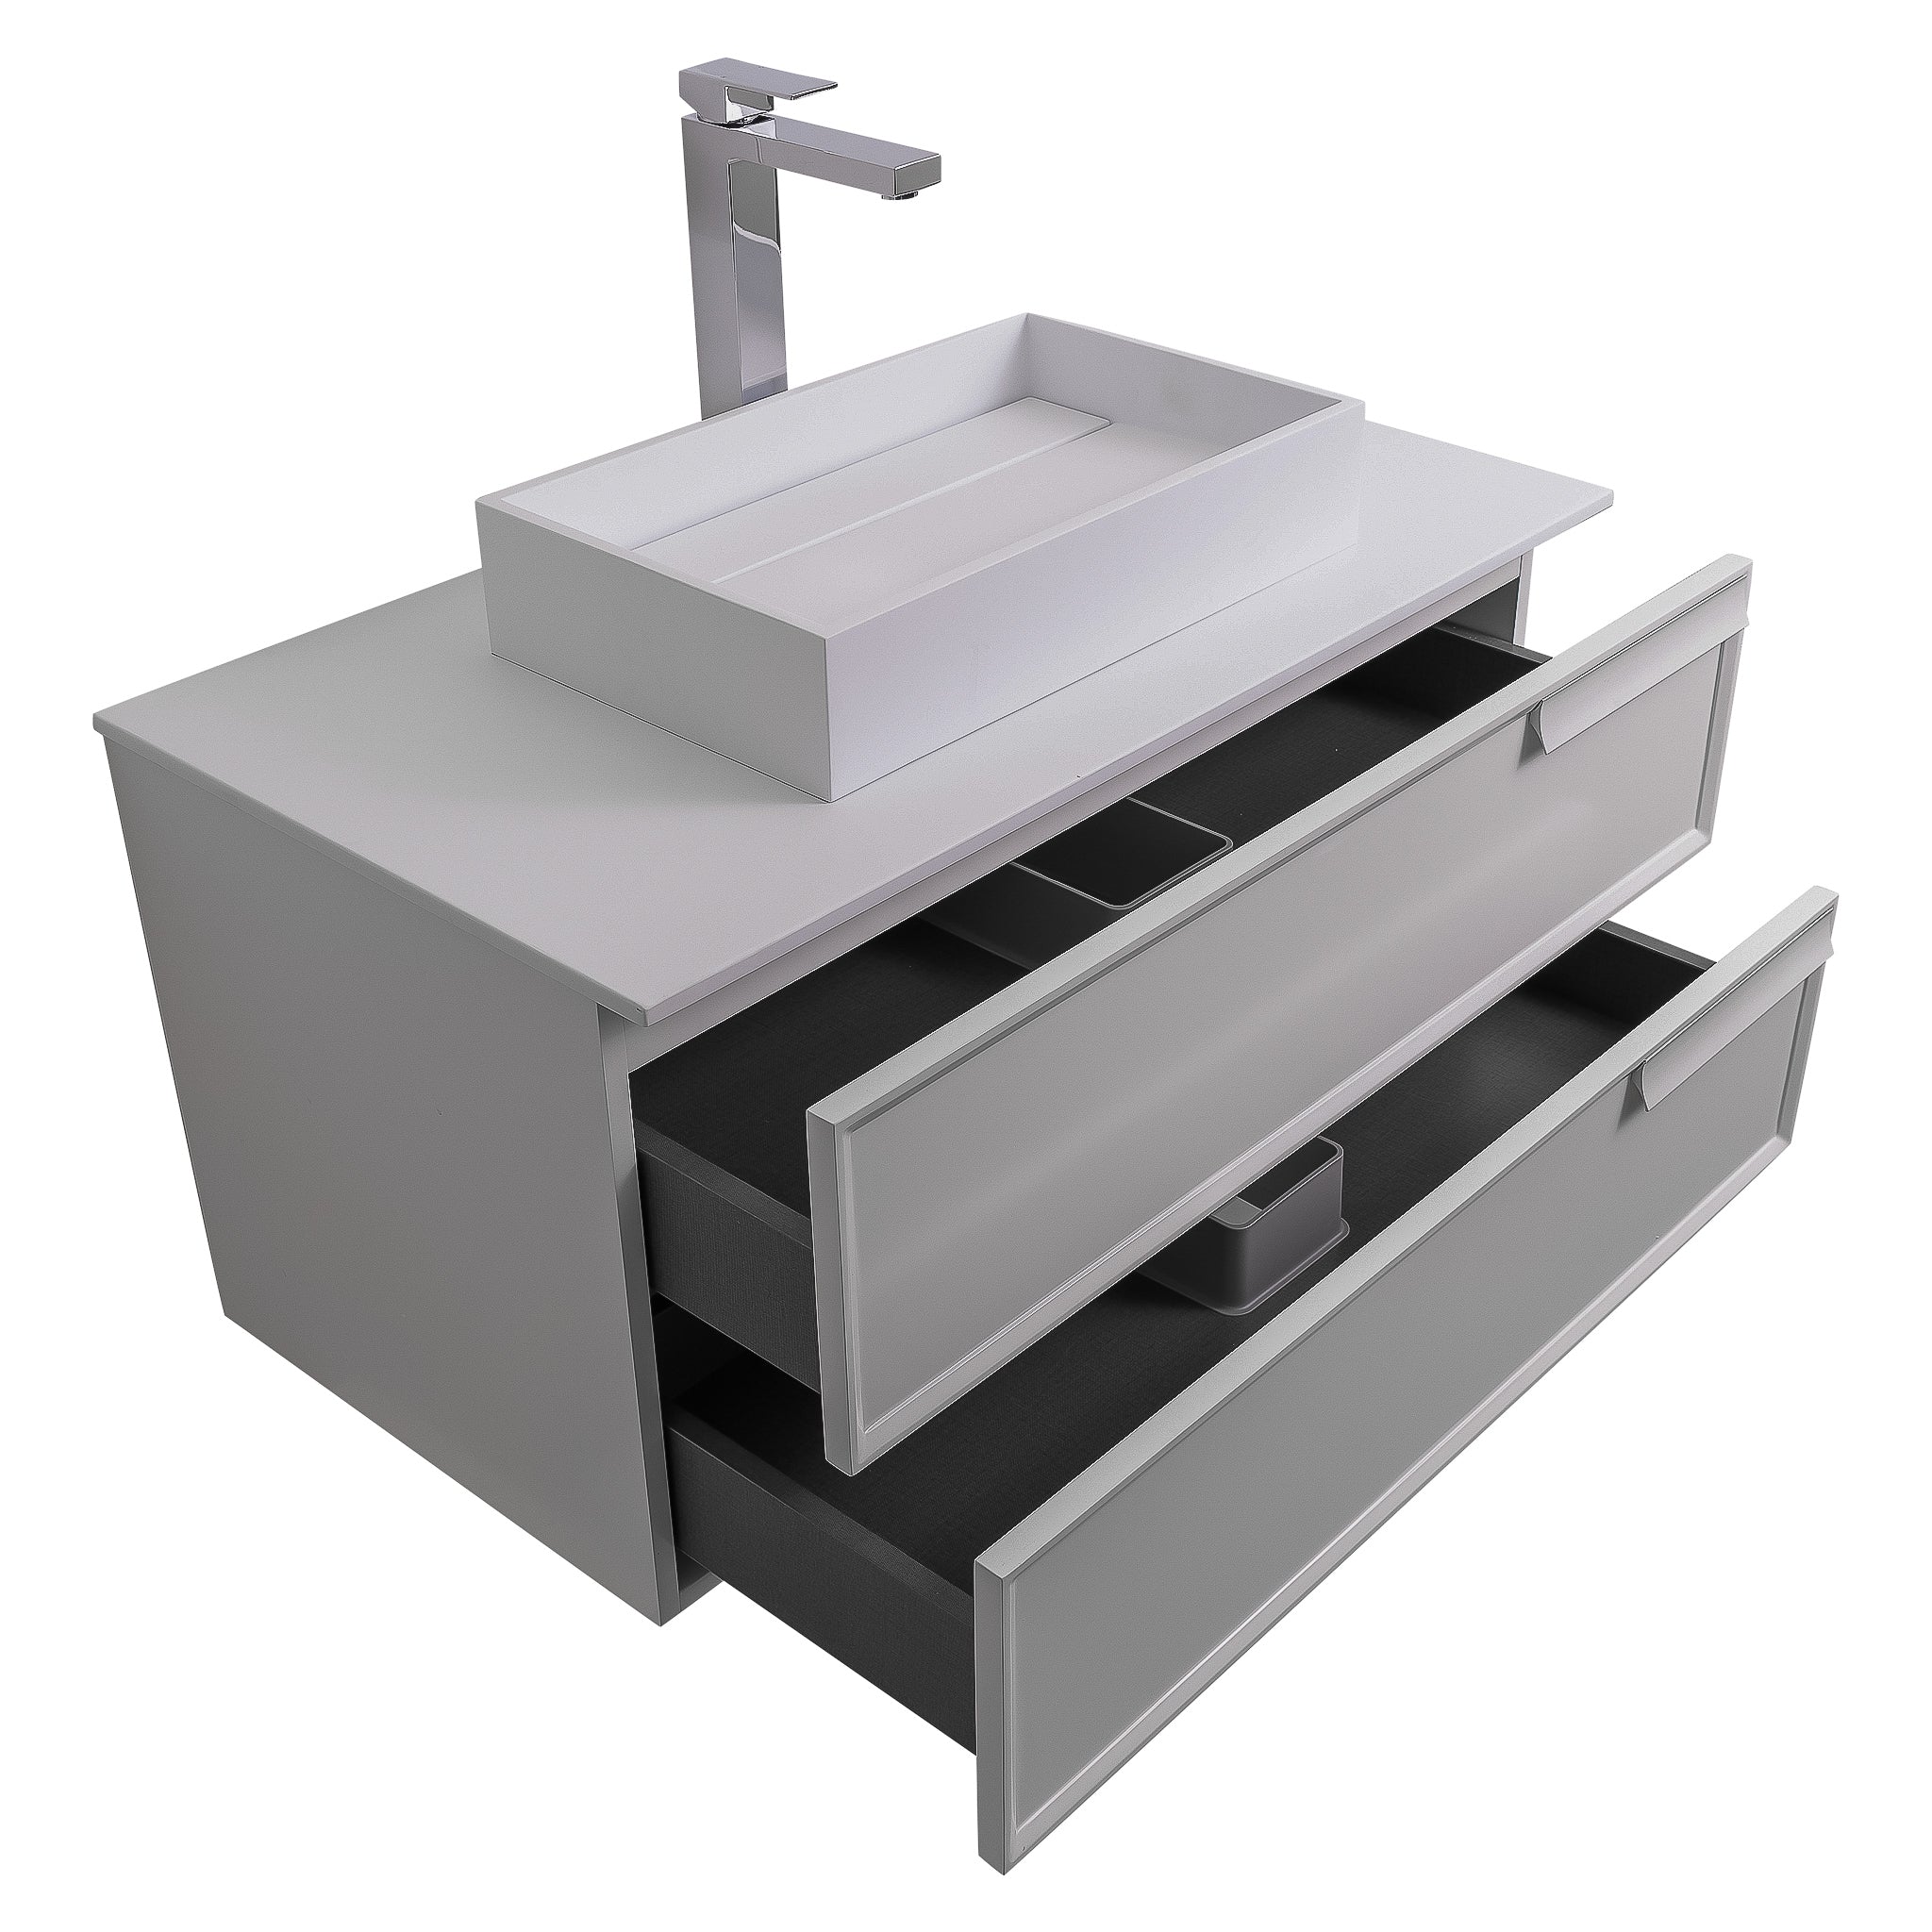 Garda 39.5 Matte White Cabinet, Solid Surface Flat White Counter and Infinity Square Solid Surface White Basin 1329, Wall Mounted Modern Vanity Set